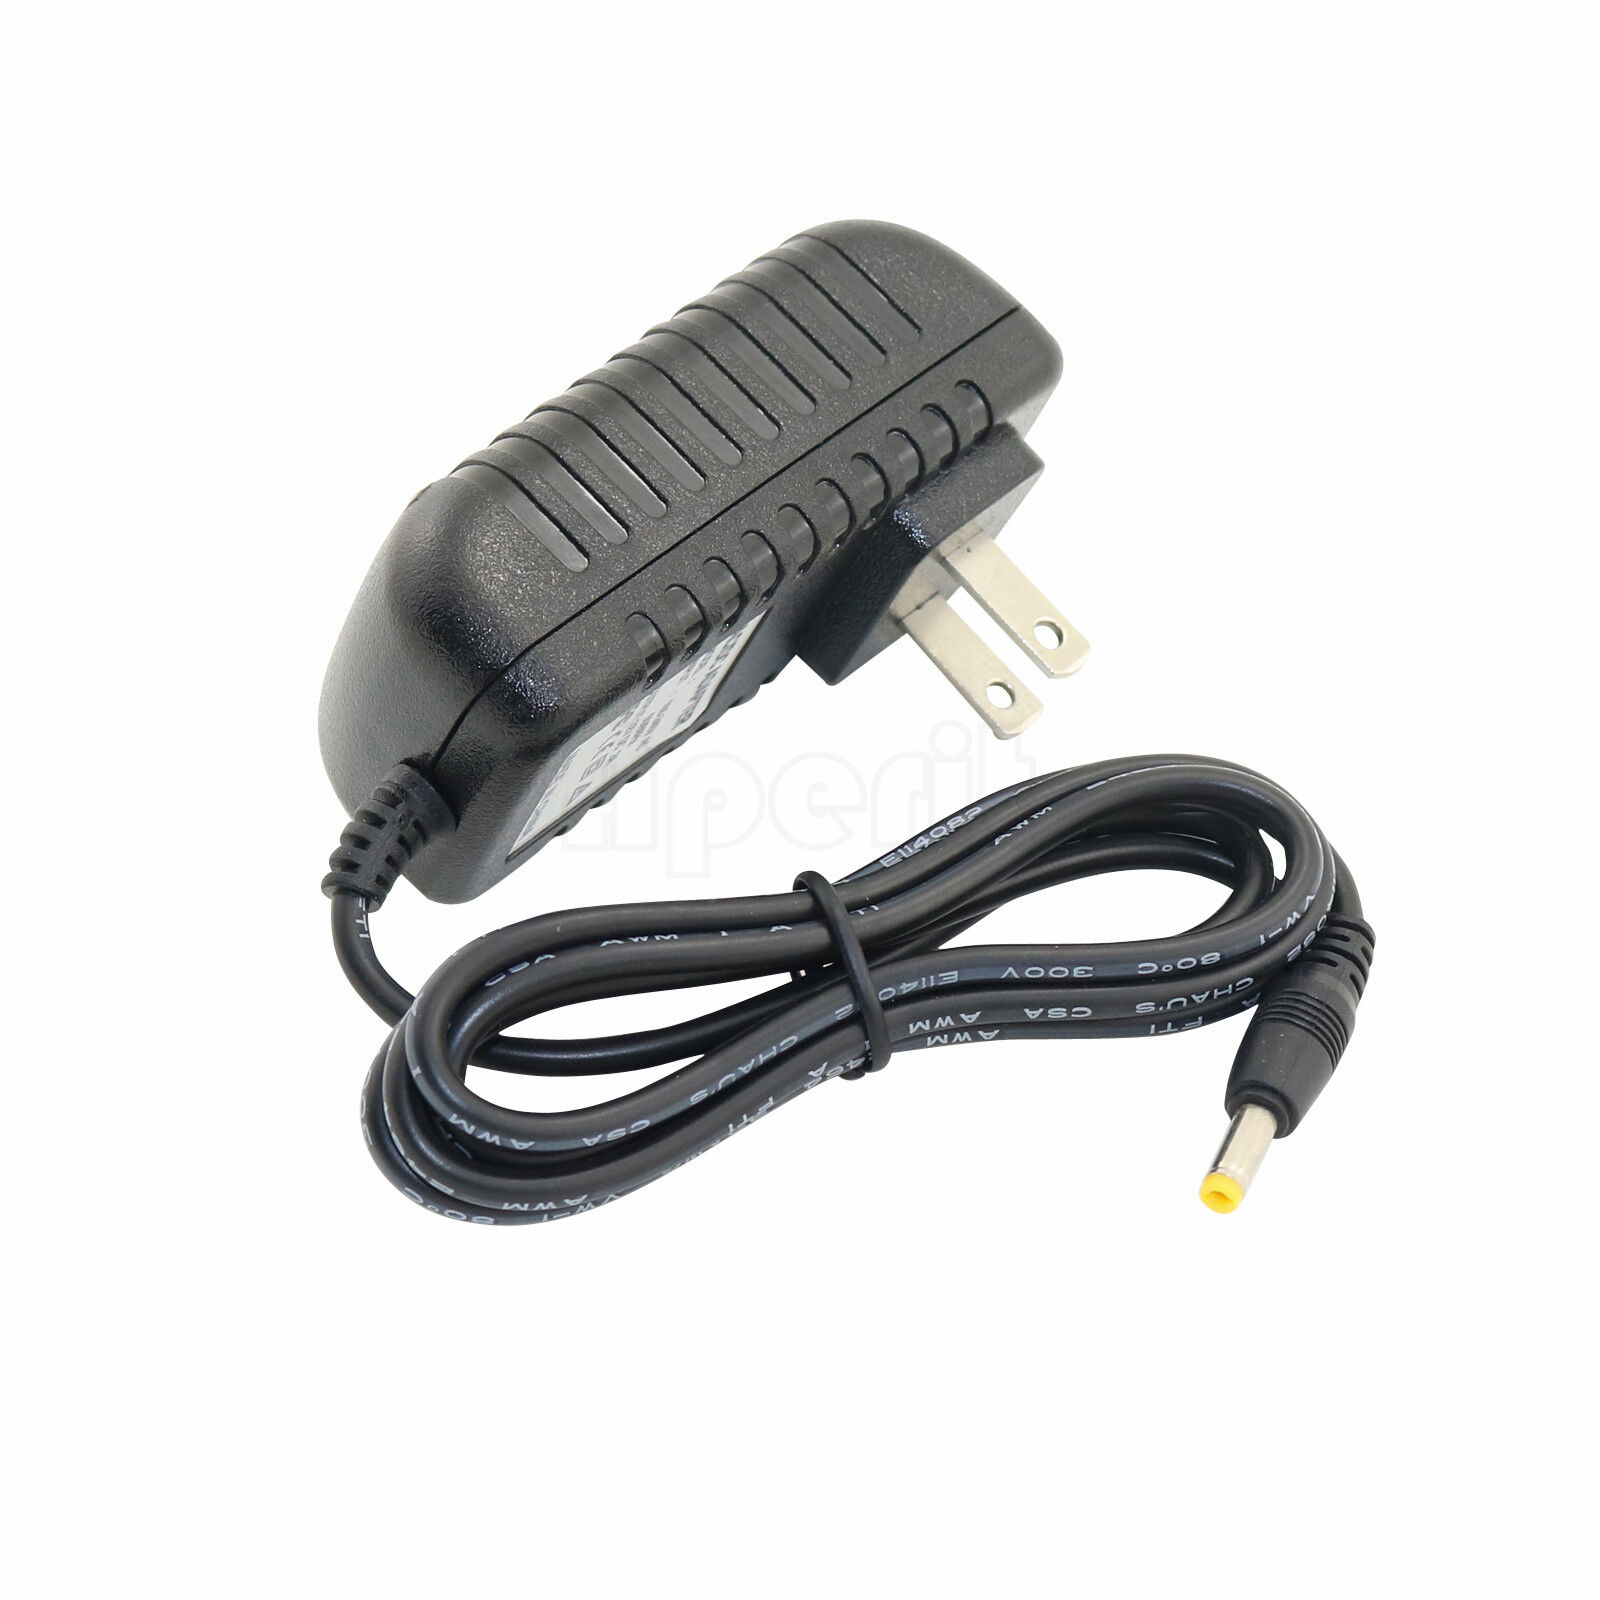 15V 2A AC/DC Adapter Charger for iHome iH8 iPod station Switching Power Supply 15V 2A AC/DC Adapter Charger for iHome i